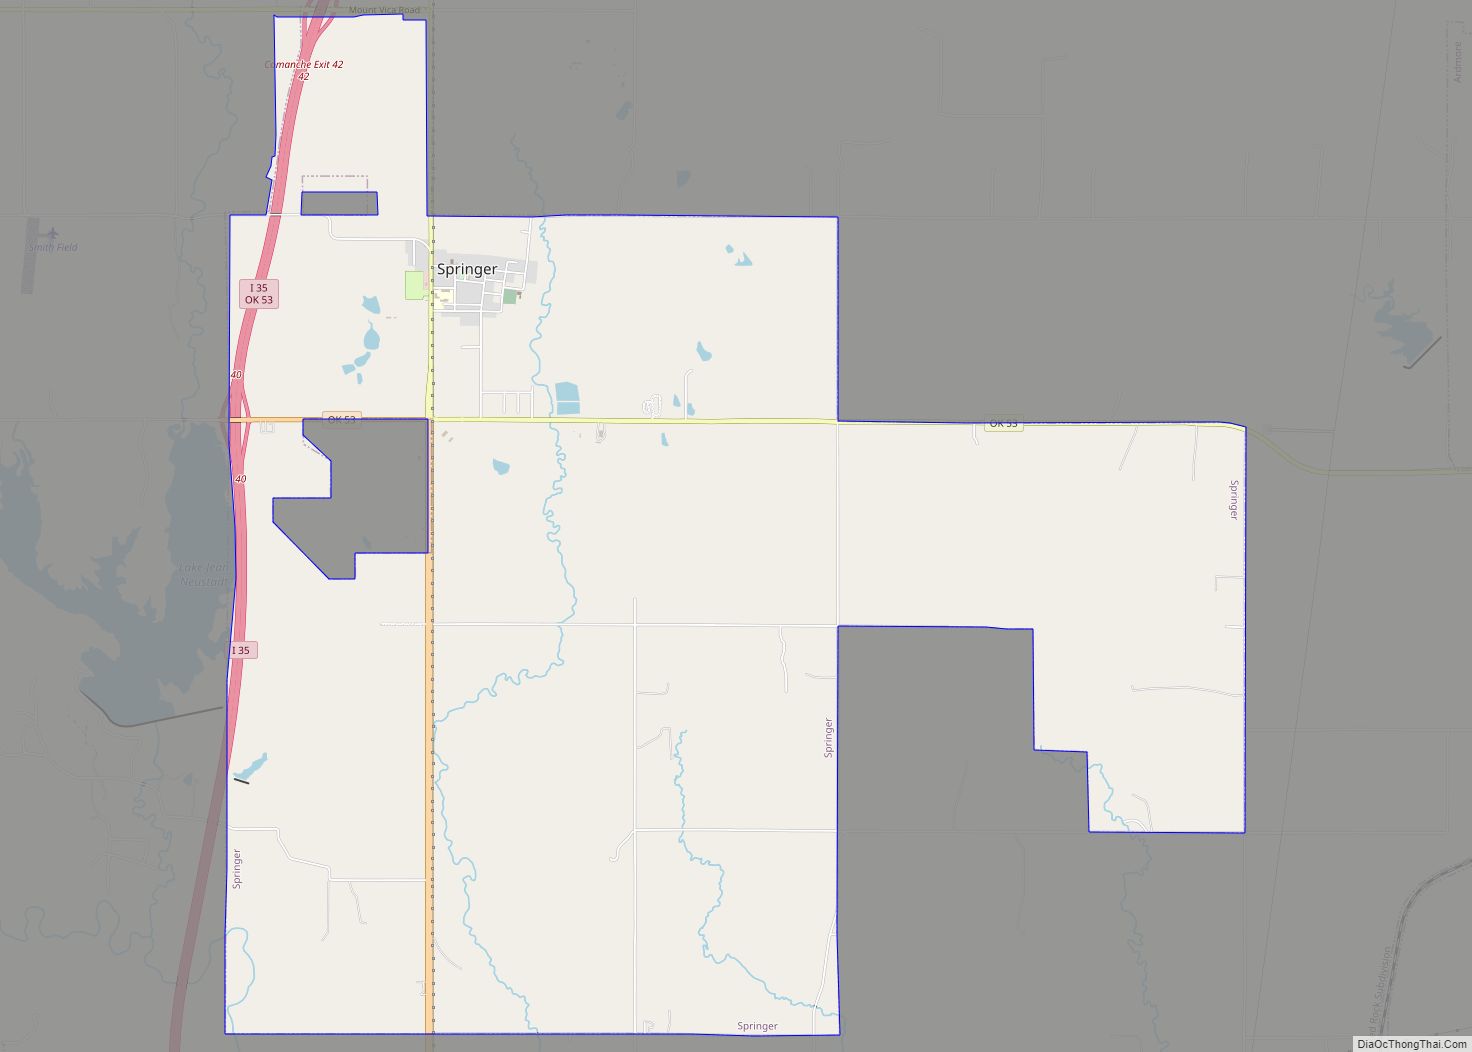 Map of Springer town, Oklahoma